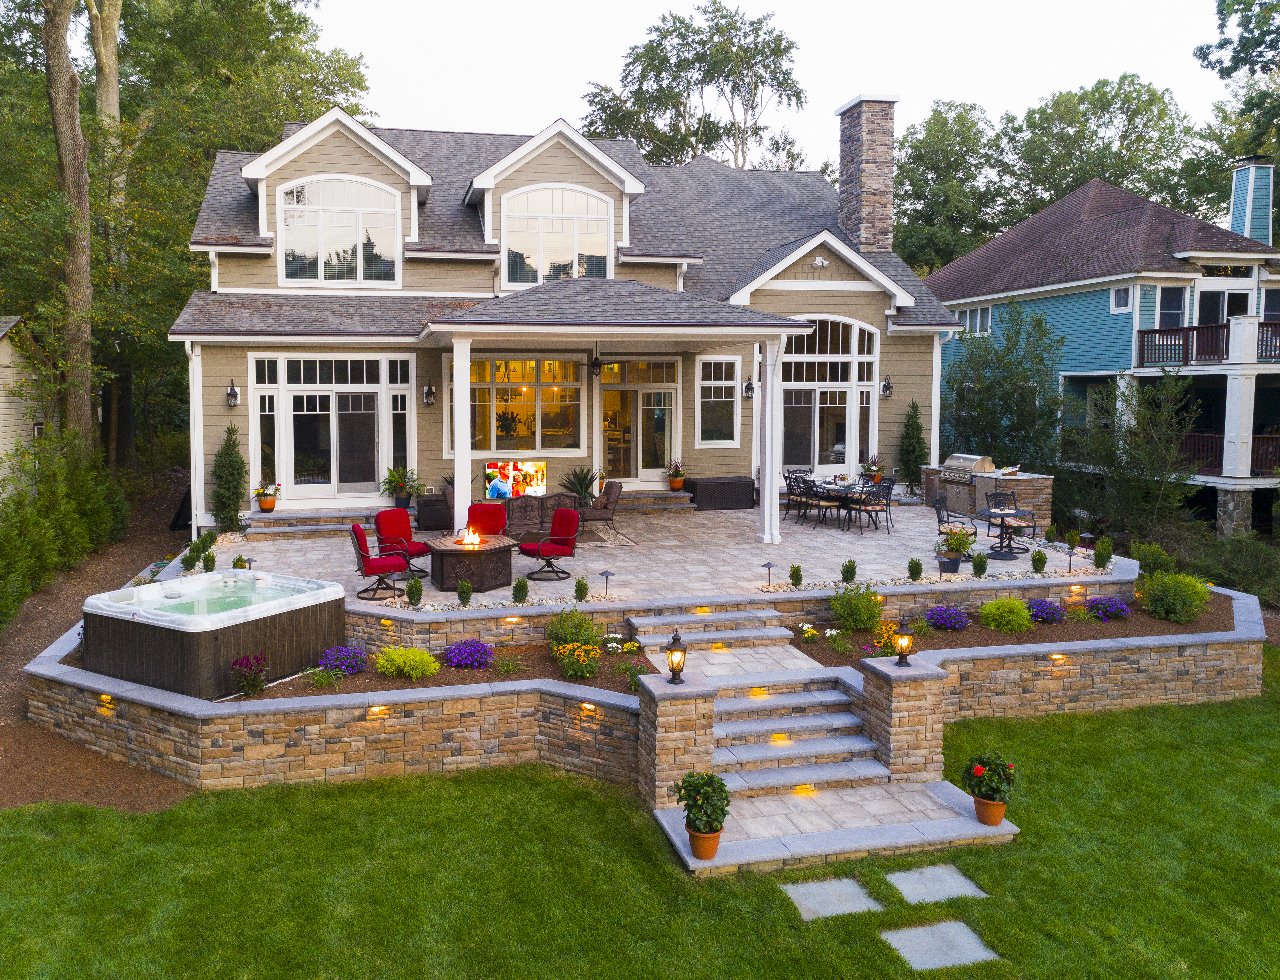 17 Paver Patio Designs With Hot Tub Images